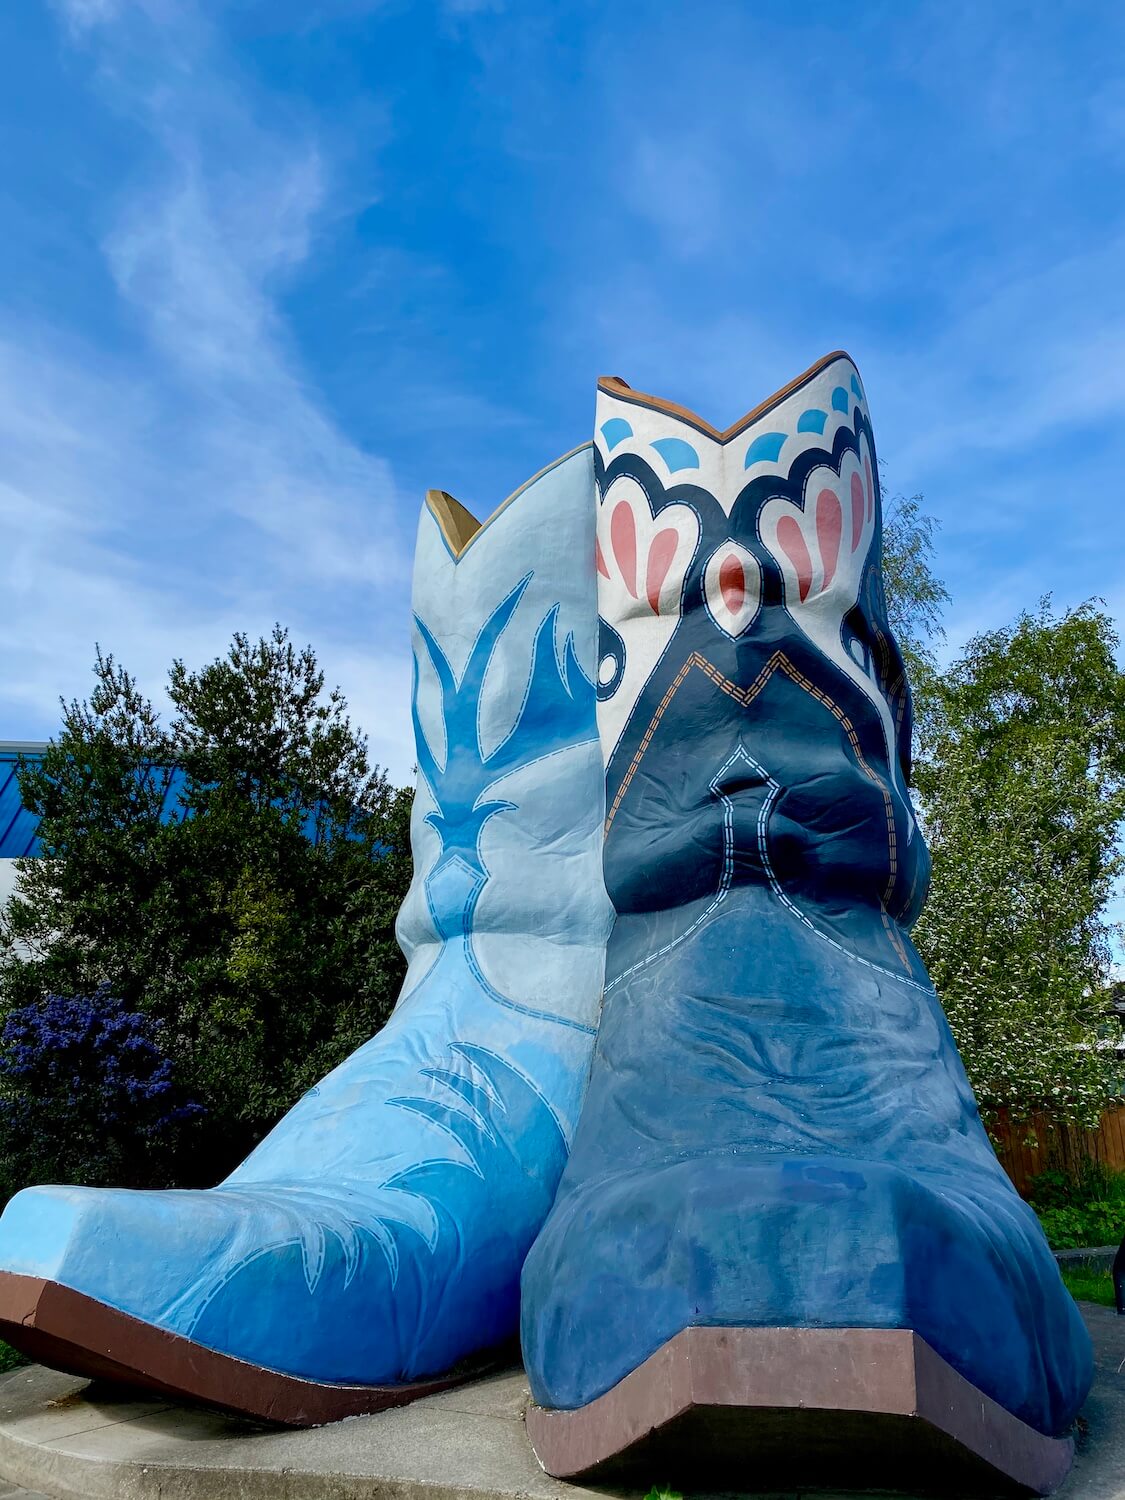 Boots and hat park in Georgetown neighborhood of Seattle reveals giant cowboy boots painted various shades of blue.  This photo represents the Fool in the Major Arcana of the tarot.